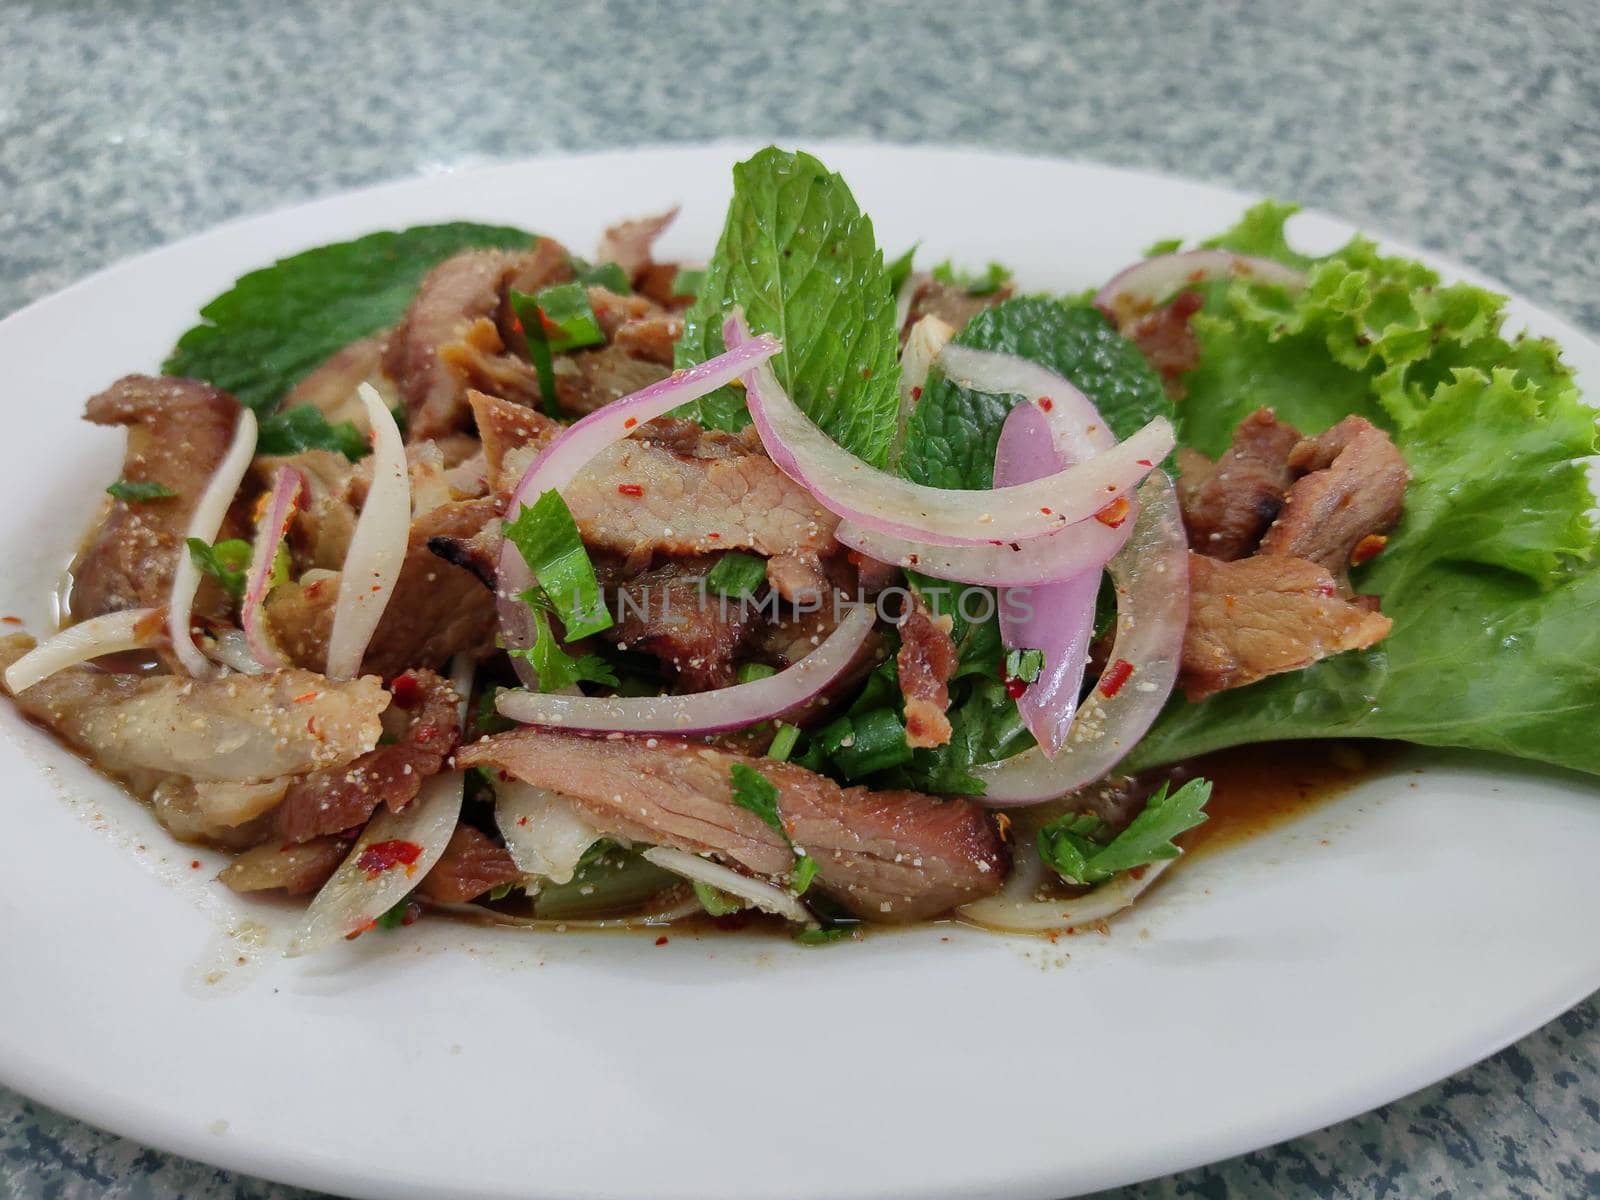 The Hot and Spicy Grilled Pork Salad on disk, Side view